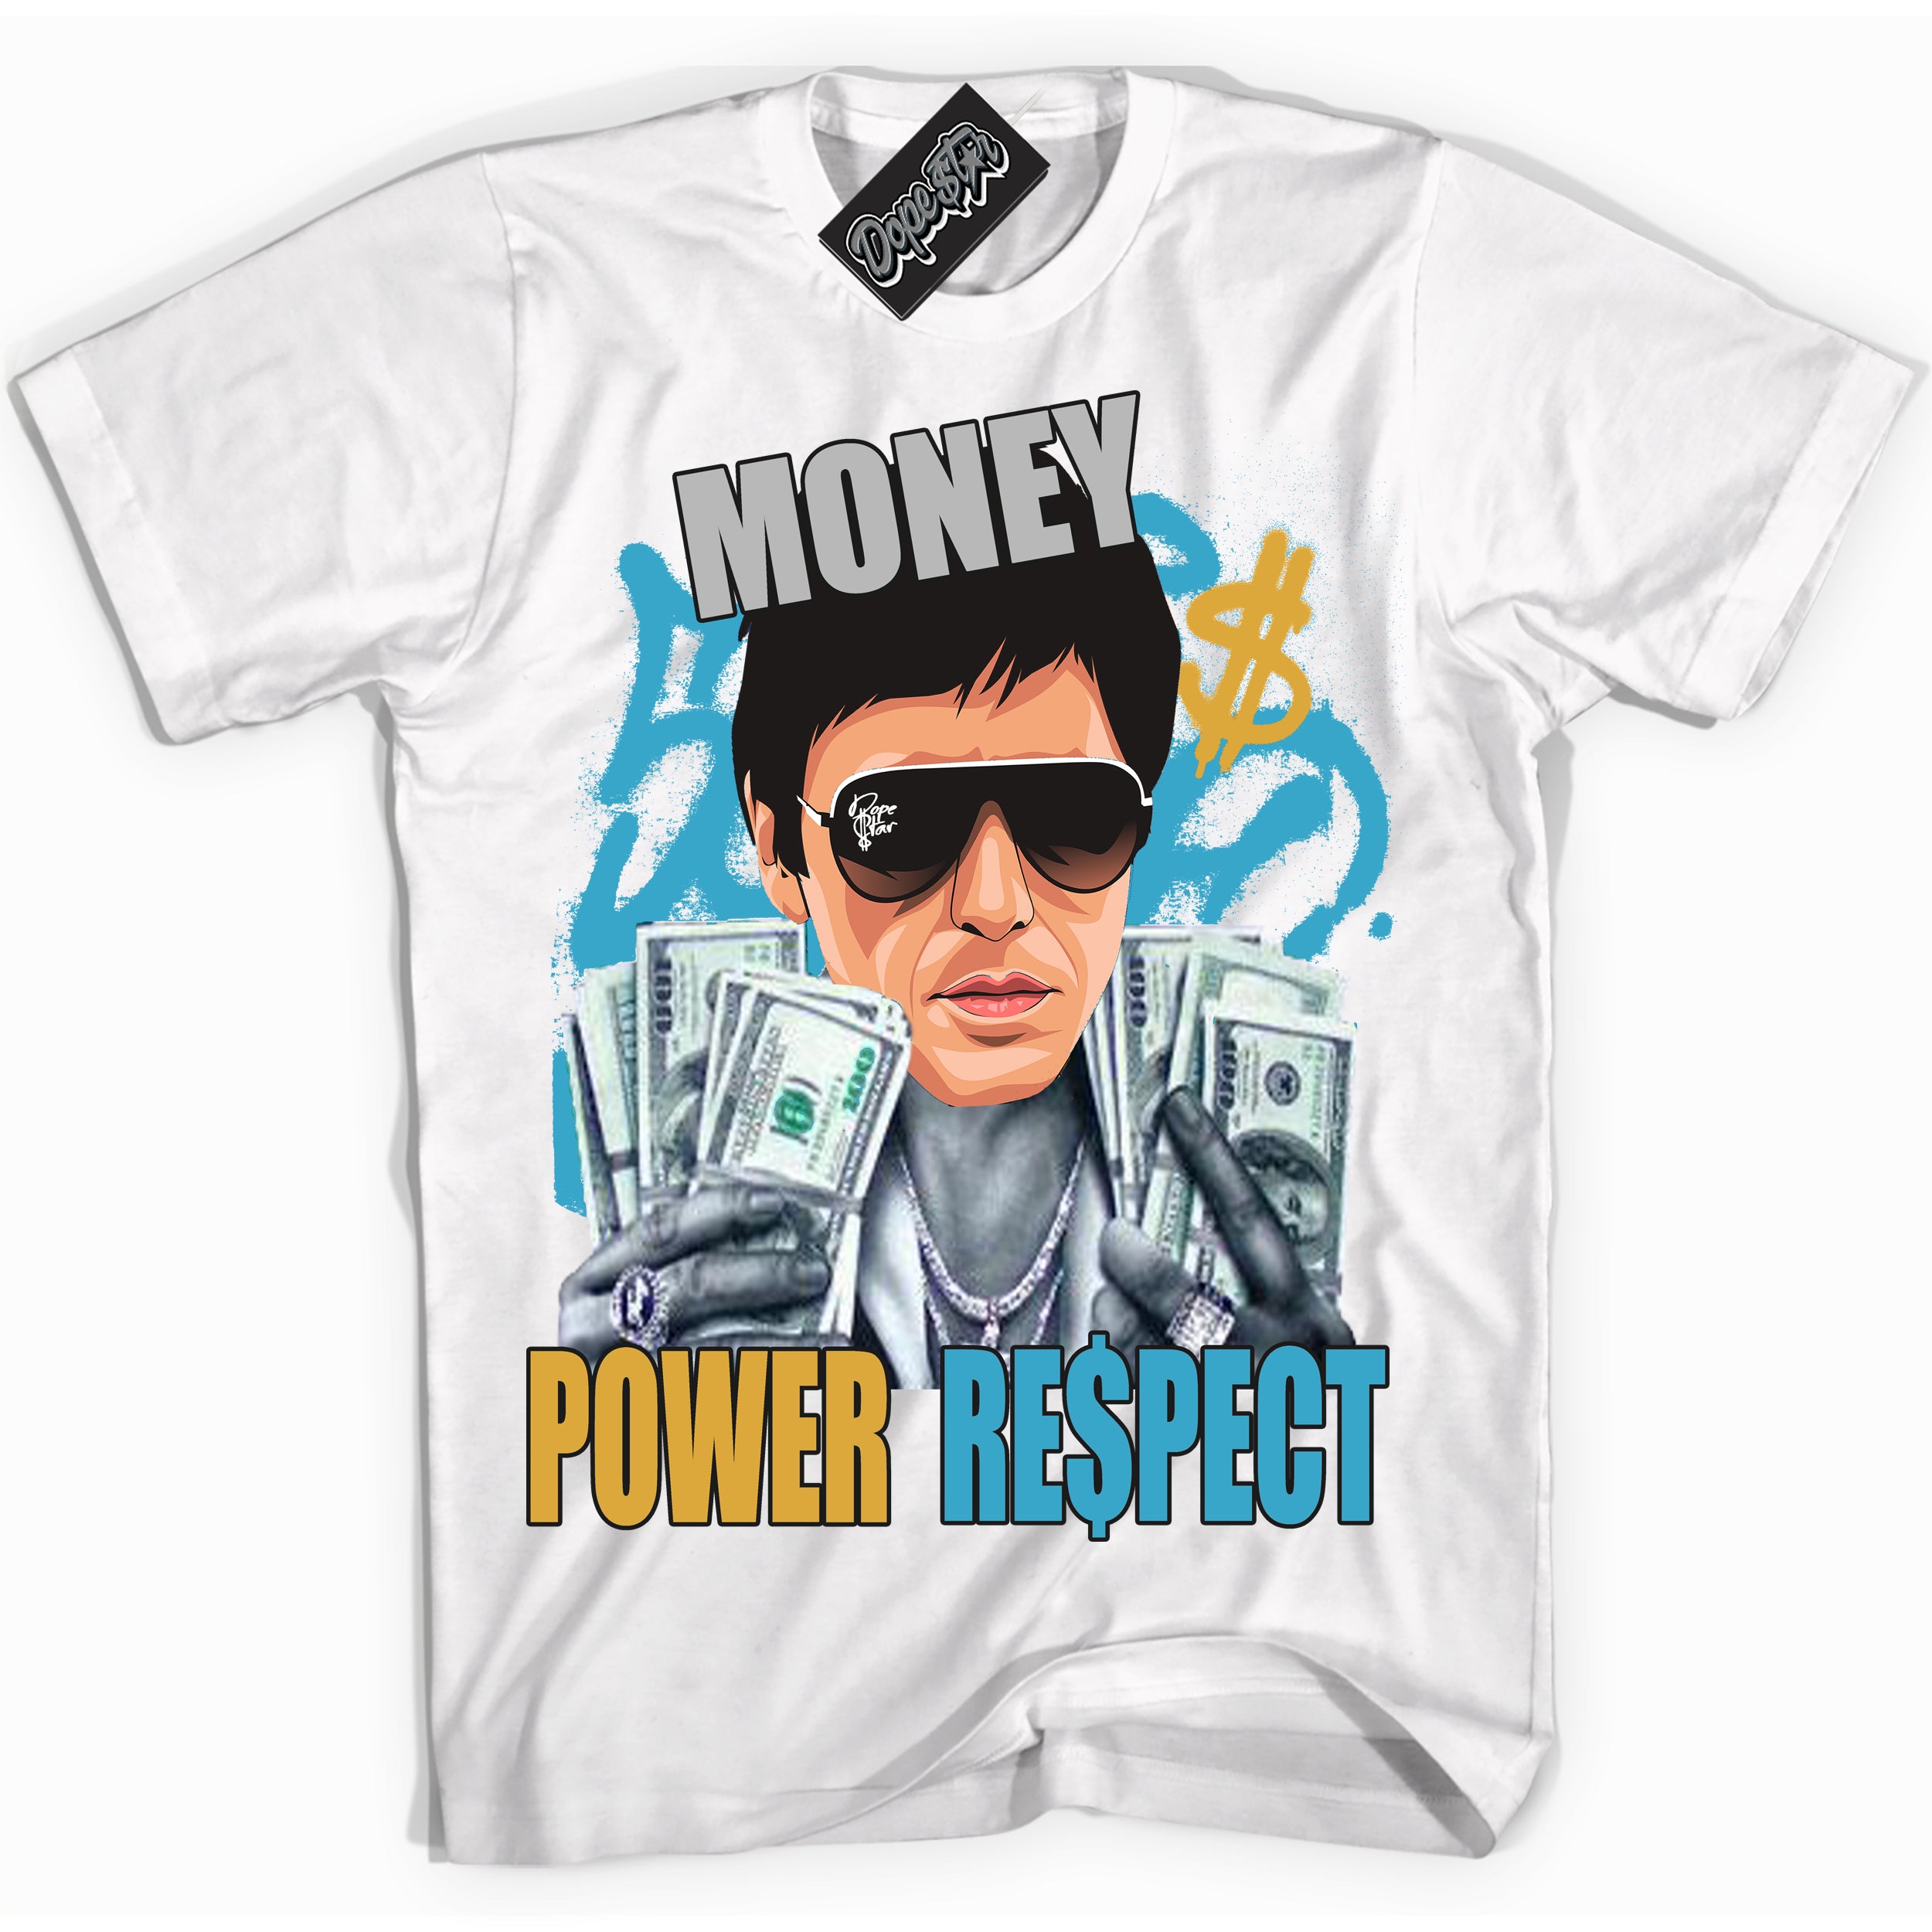 Cool White Shirt with “ Tony Montana” design that perfectly matches Aqua 5s Sneakers.